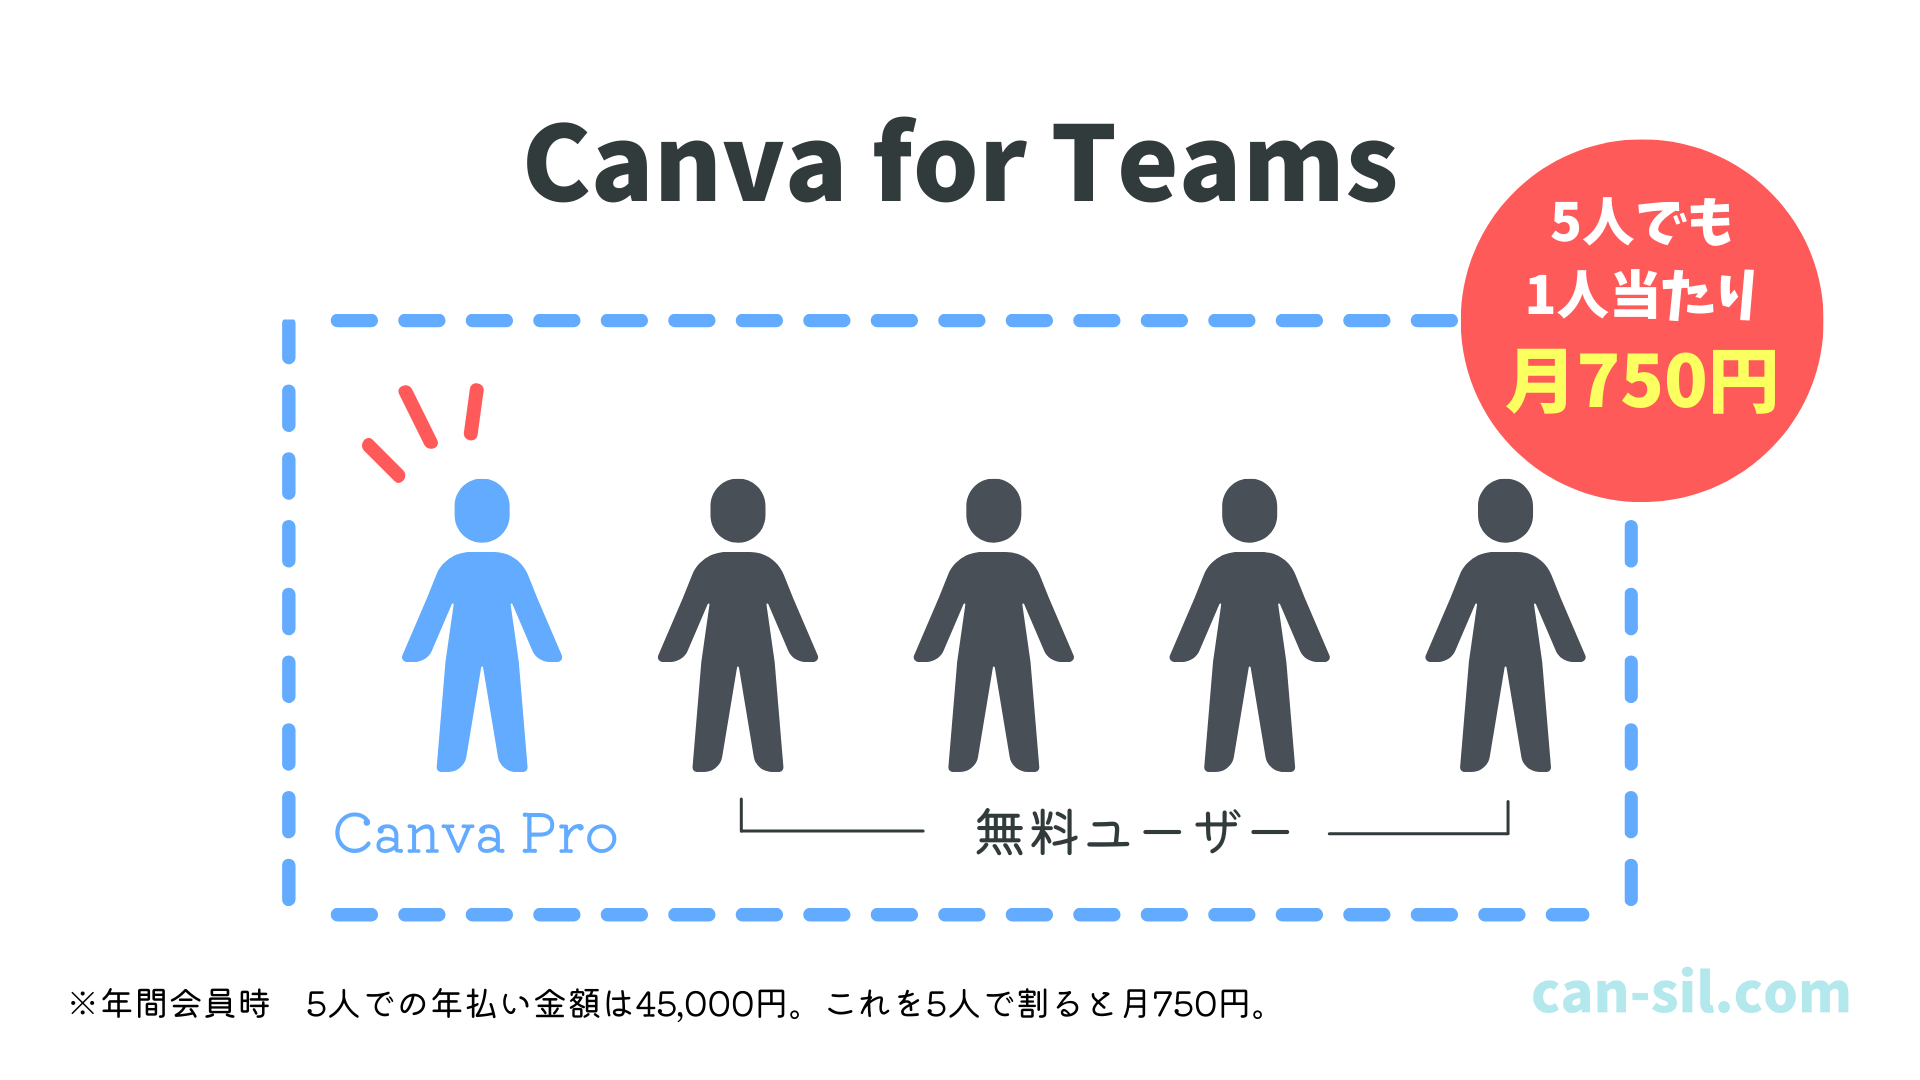 Canva for Teamsの料金